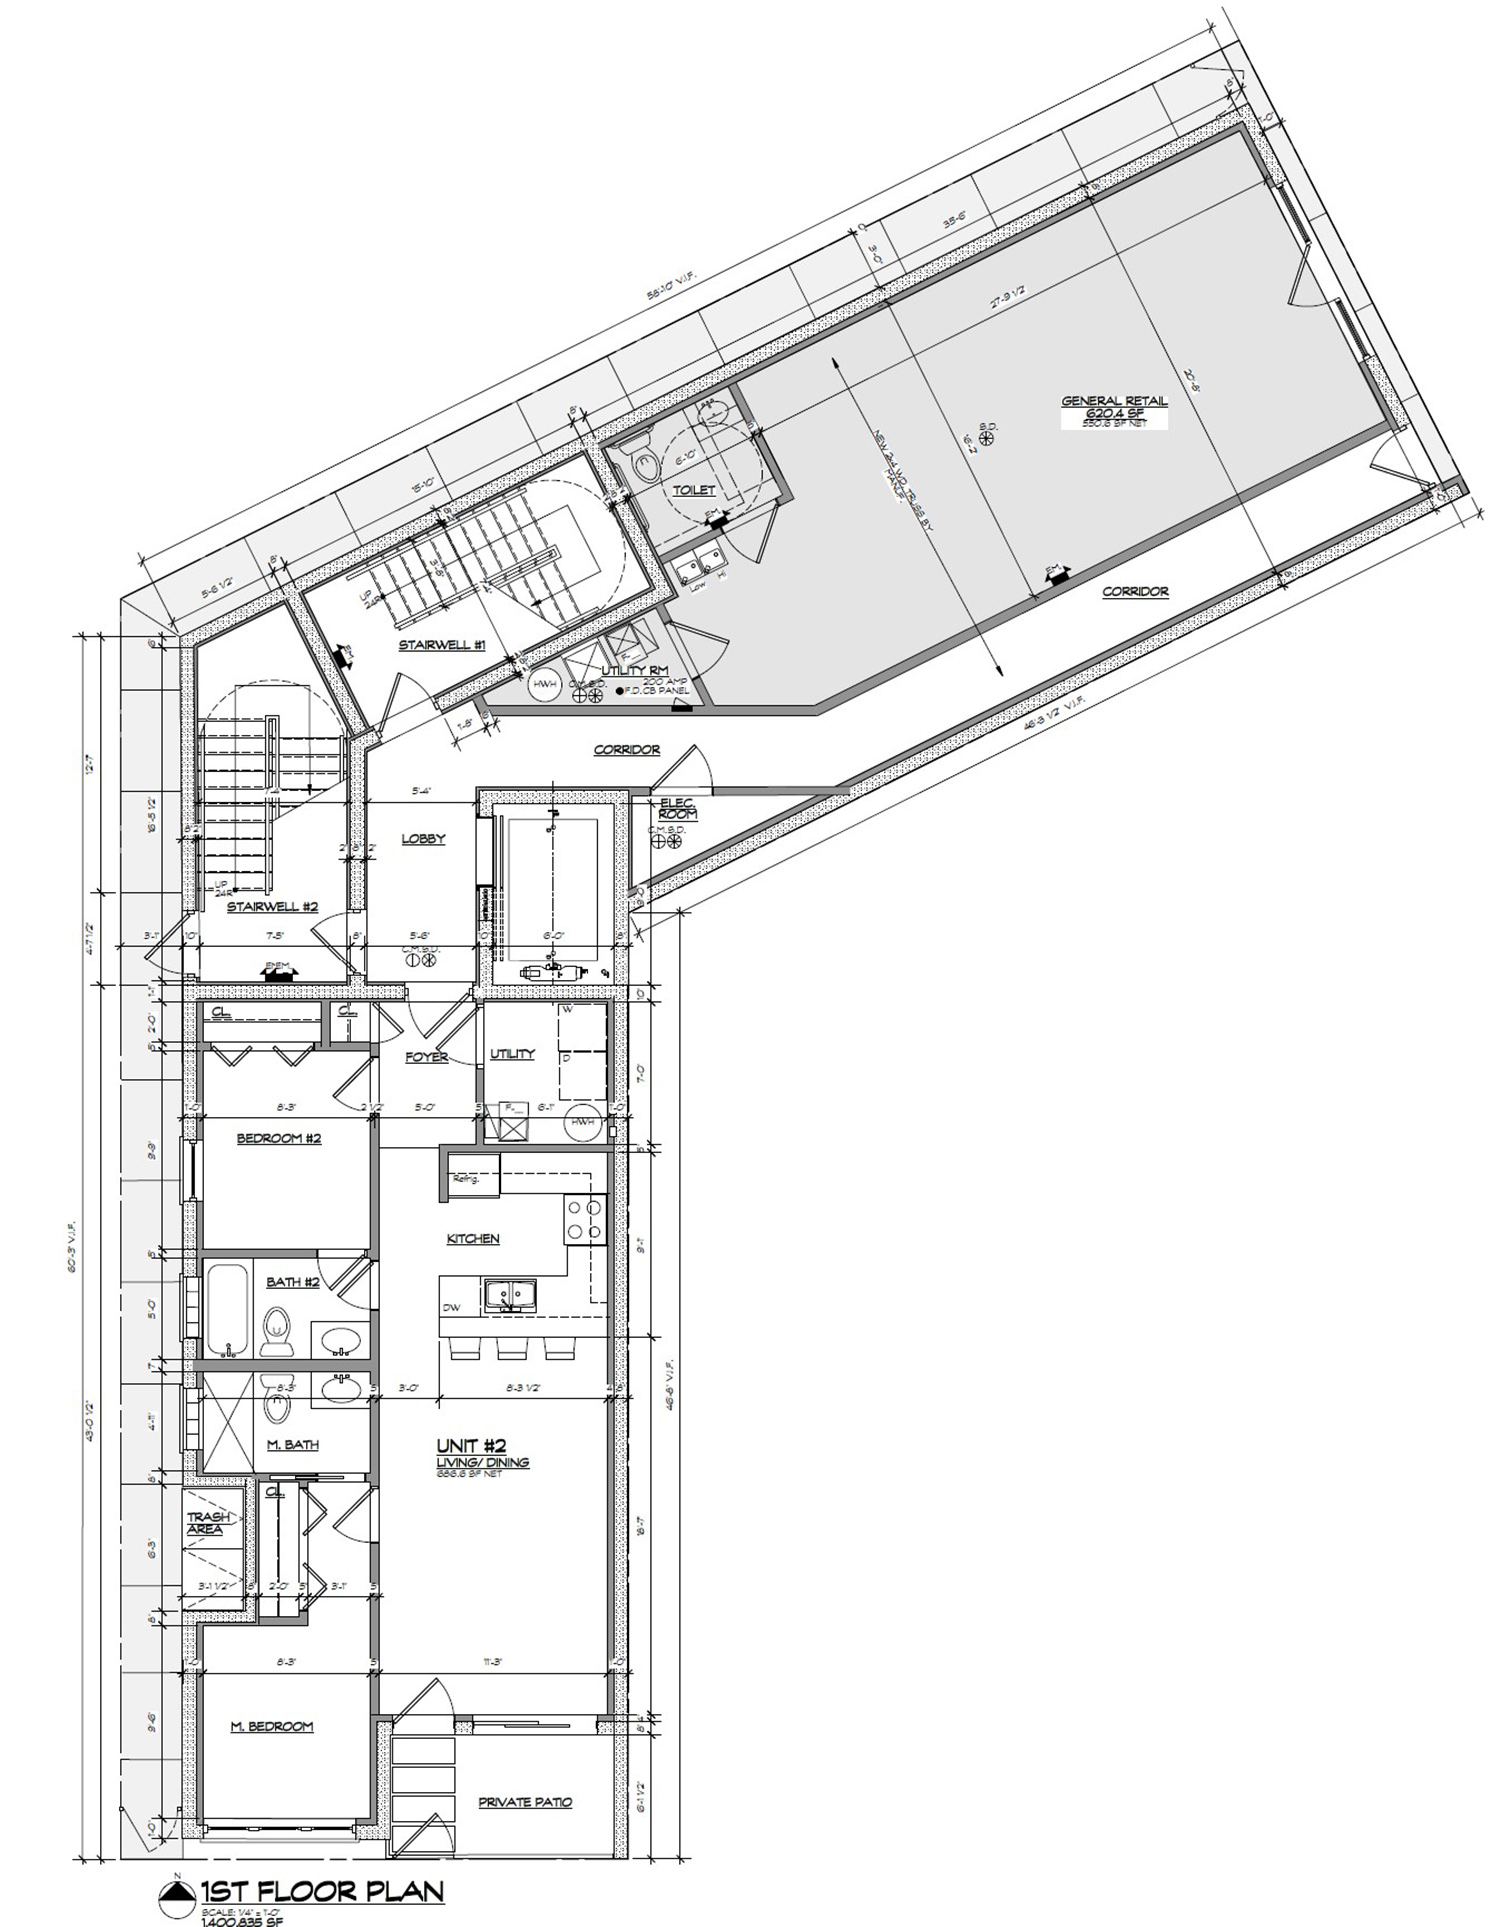 Ground Floor Plan of 3244 N Lincoln Avenue. Drawing by Lazlo Simovic Architects